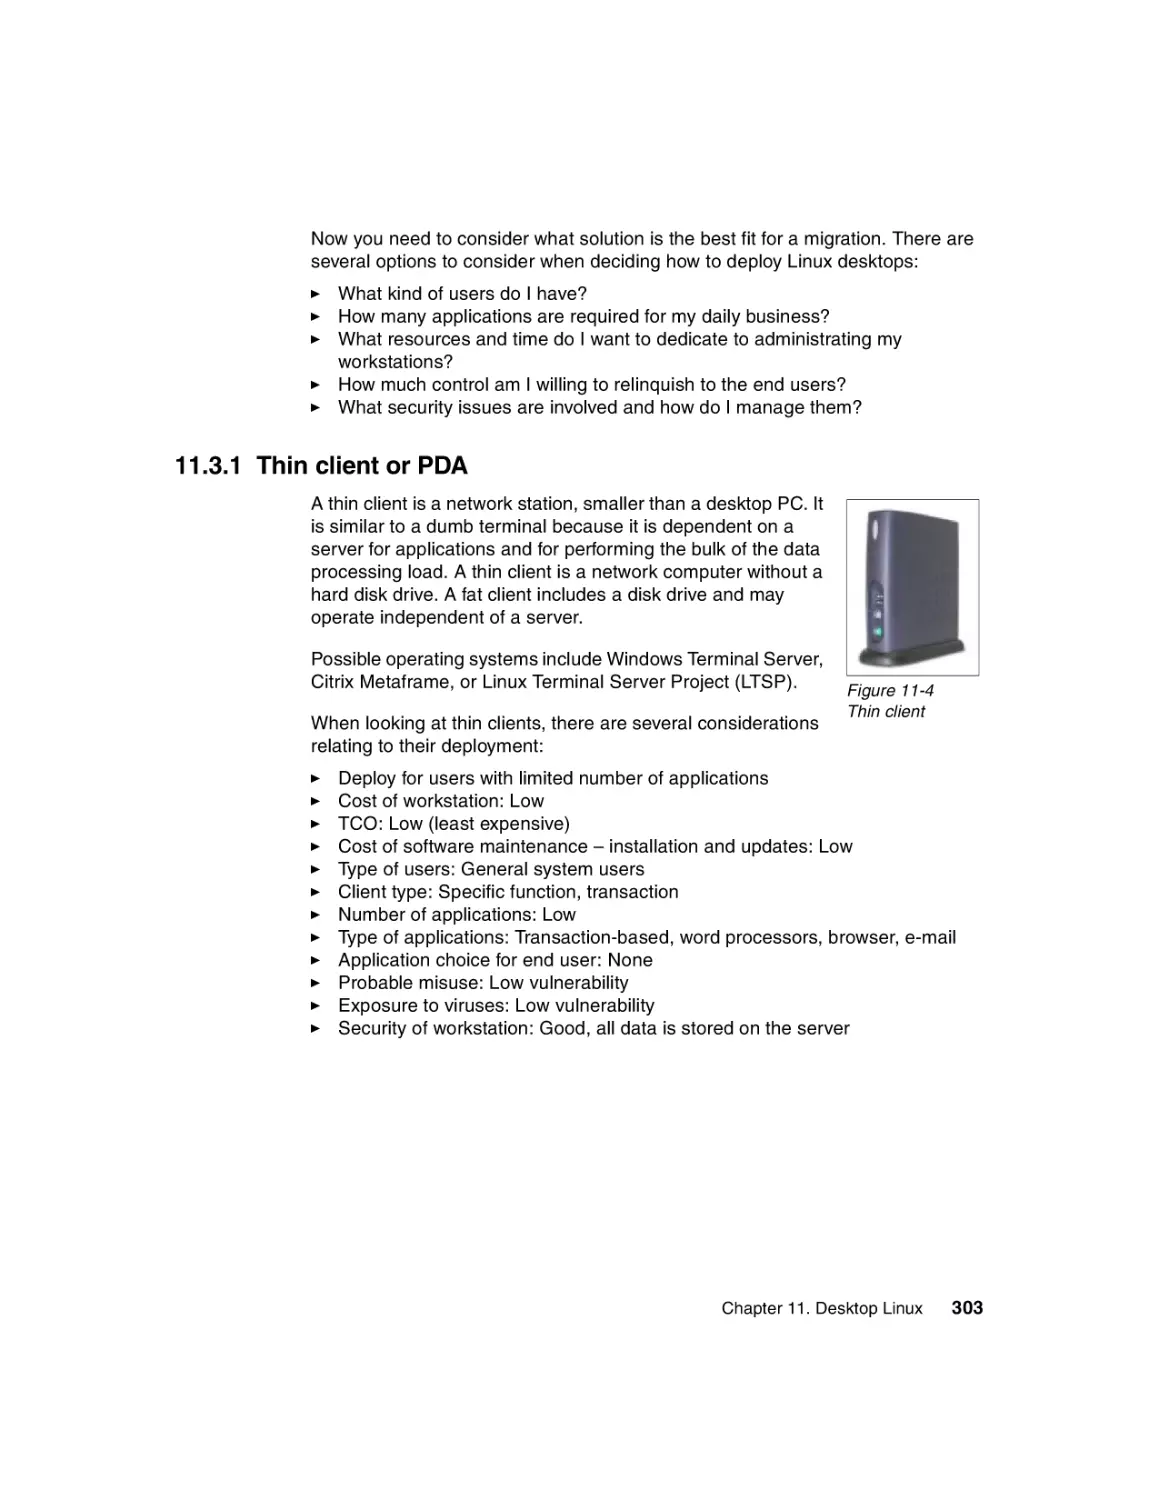 11.3.1 Thin client or PDA